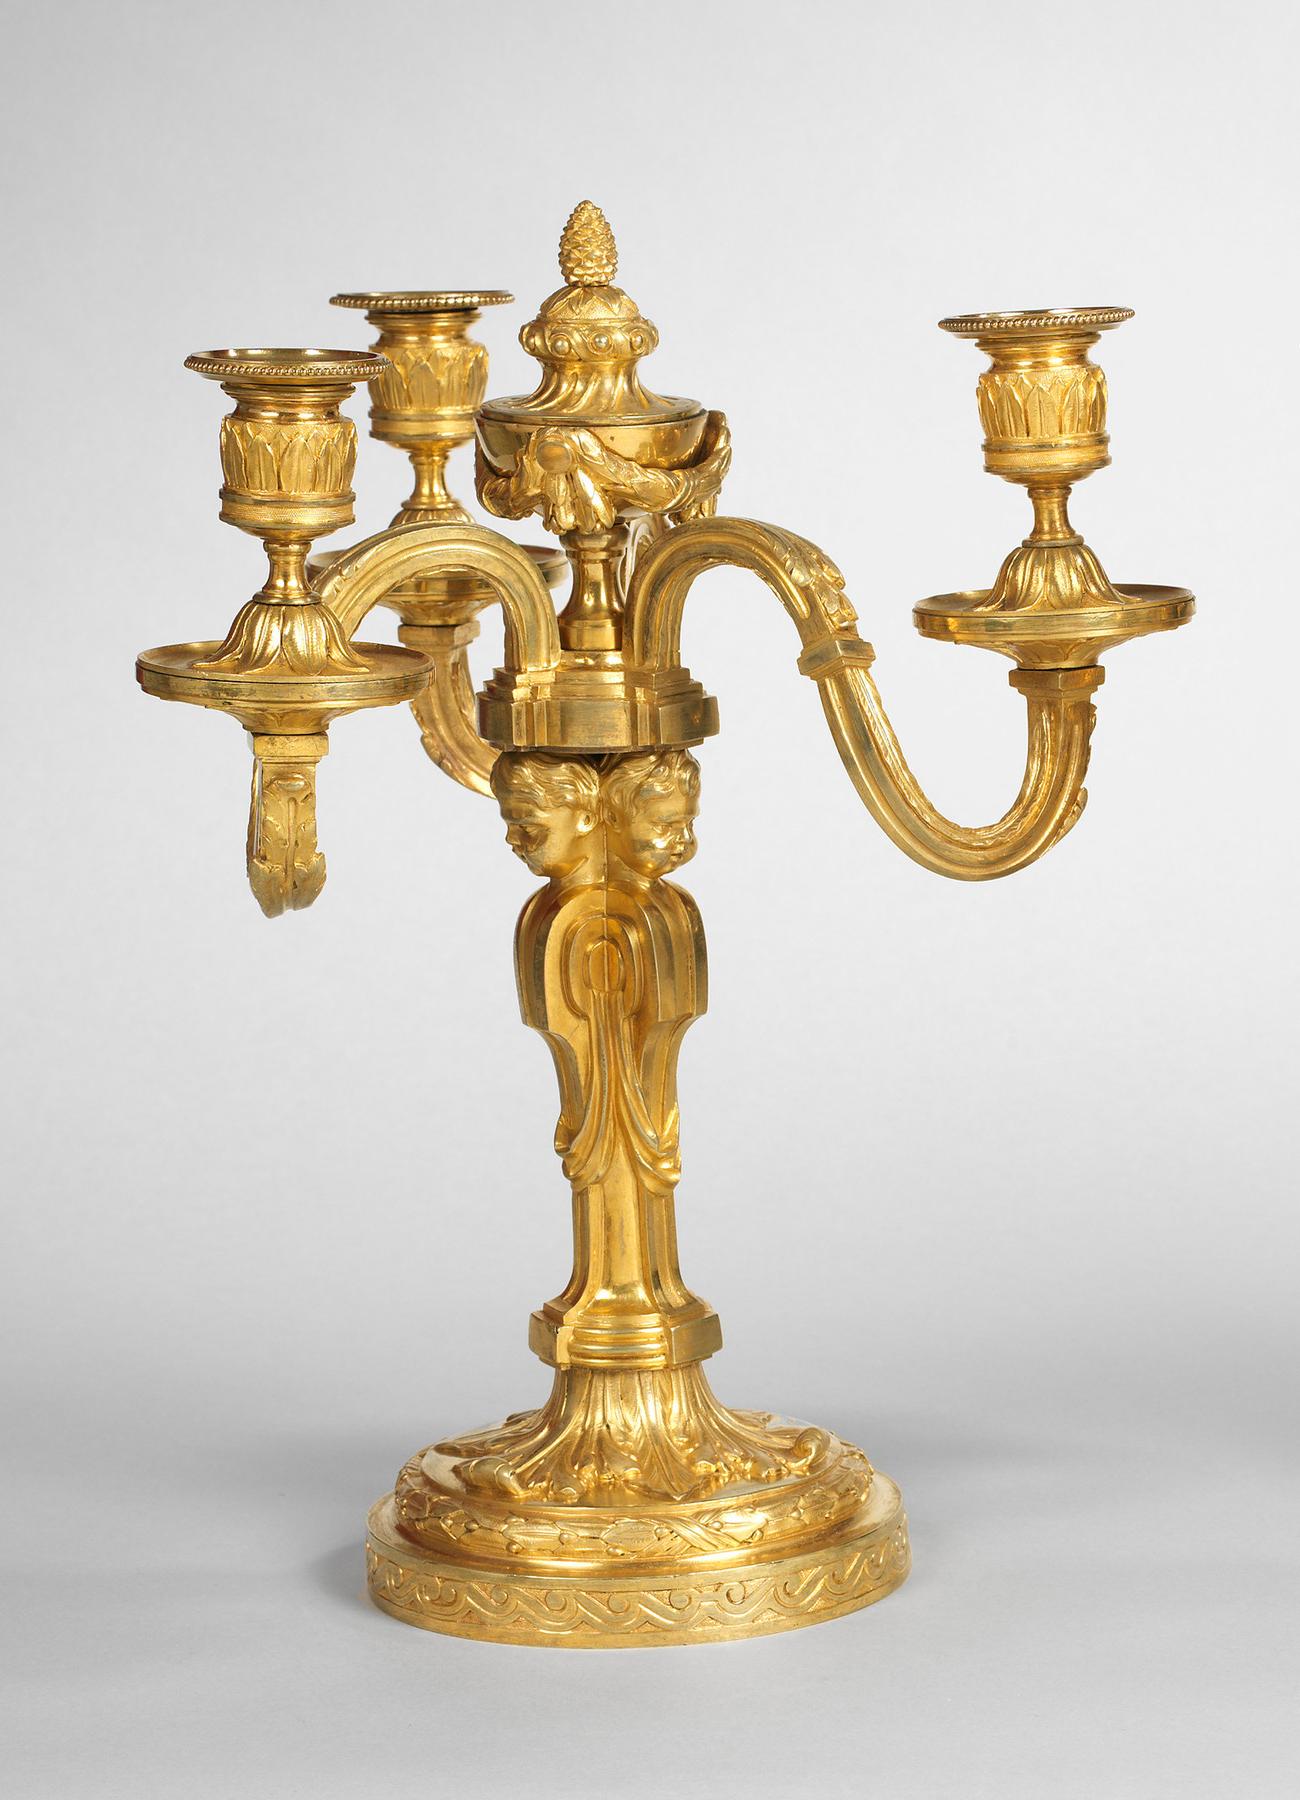 The acanthus asymmetric scrolling arms with palmette nozzles and detachable beaded drip pans above inverted lotus domed circular collars; surmounted by a central ribbon tied laurel garlanded pedestal urn with pine-cone finial; the baluster stem